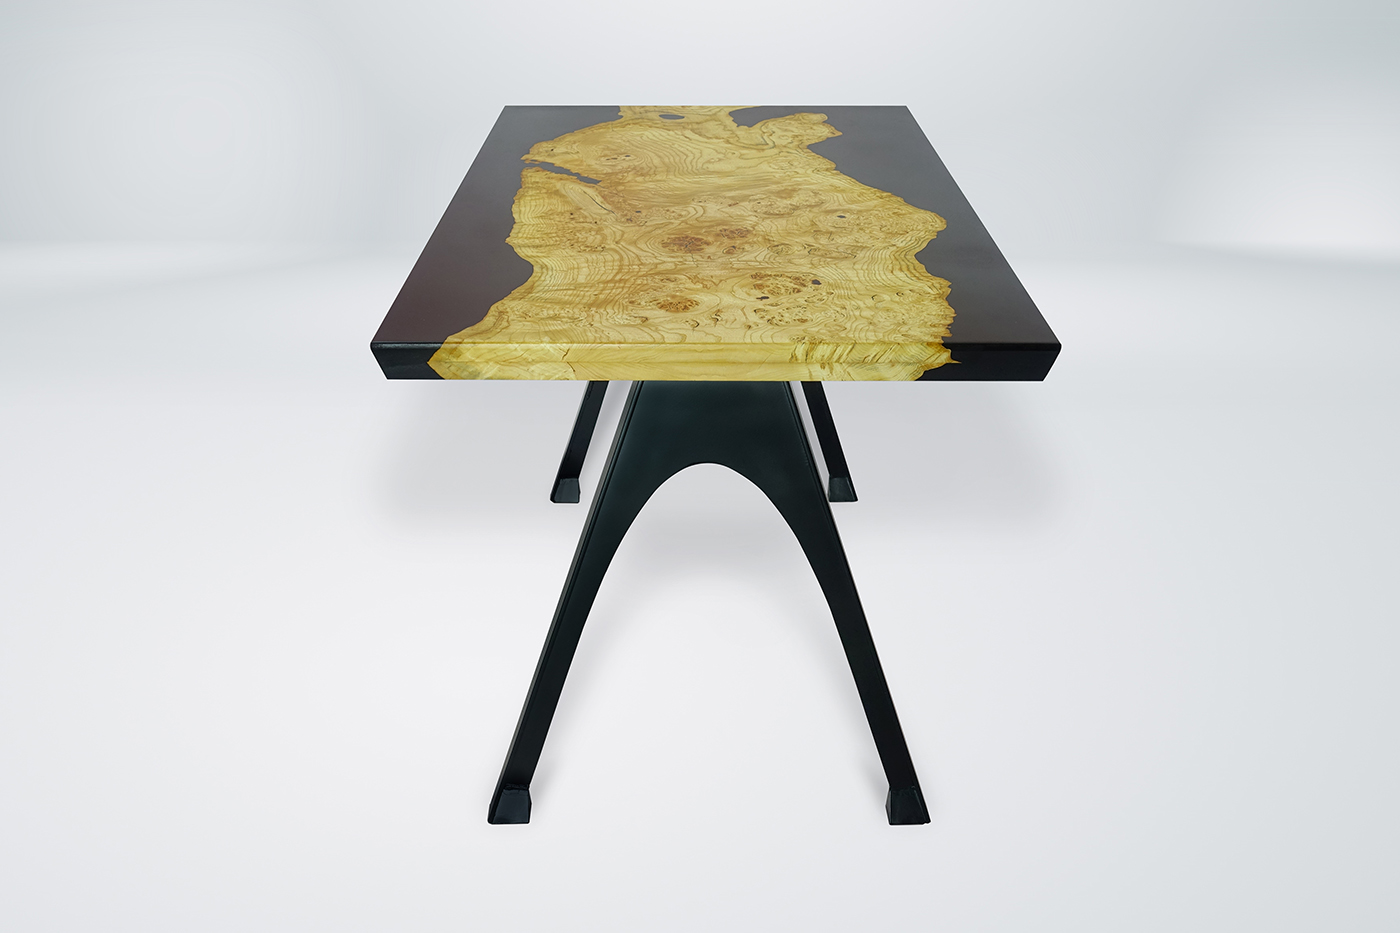 This wood furniture river table desk is a beautiful combination of olive ash burls wood and black epoxy resin